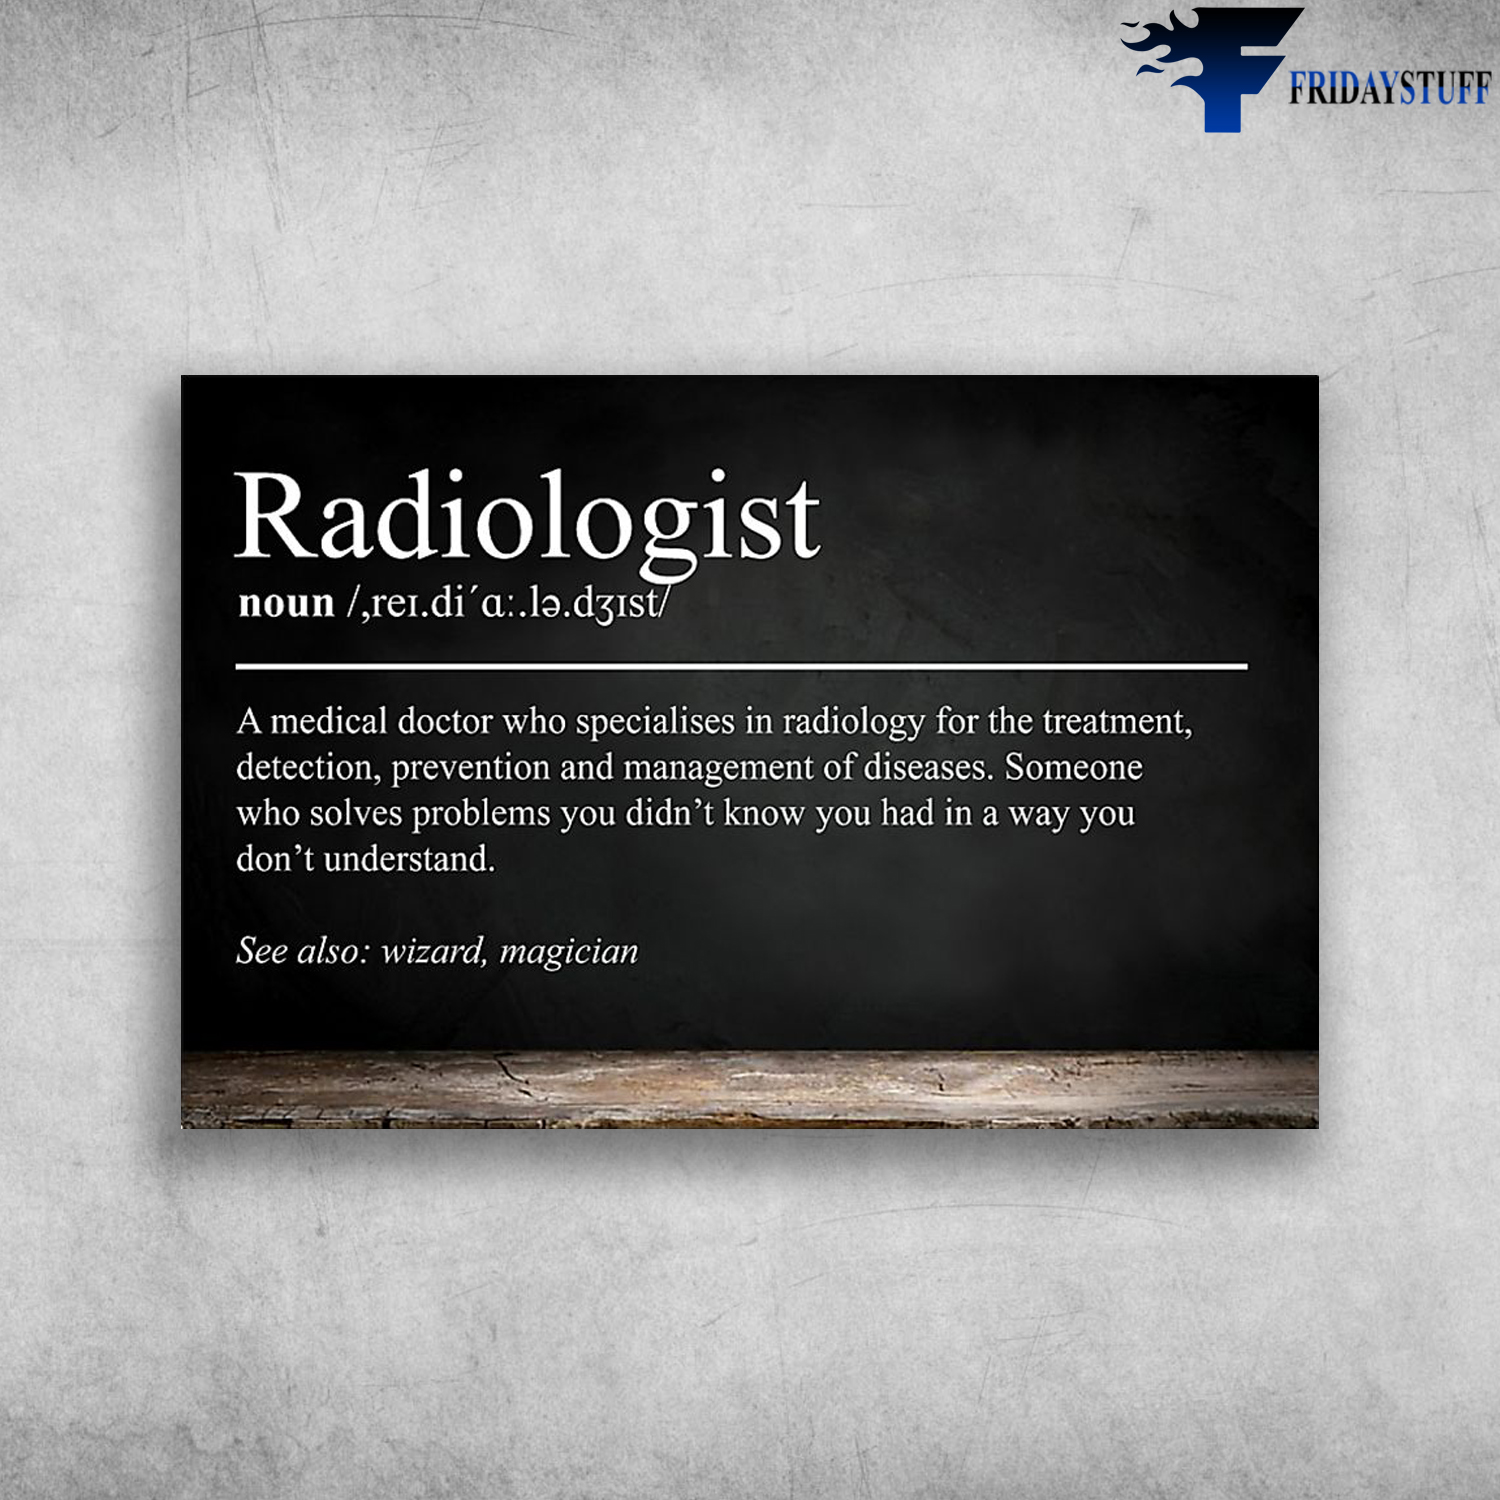 Radiologist Definition - A Medical Doctor Who Specialises In Radiology, For The Treatment, Detection, Prevention And Management Of Diseases Someone Who Solves Problems You Didn't Know You Had In A Way You Don't Understand